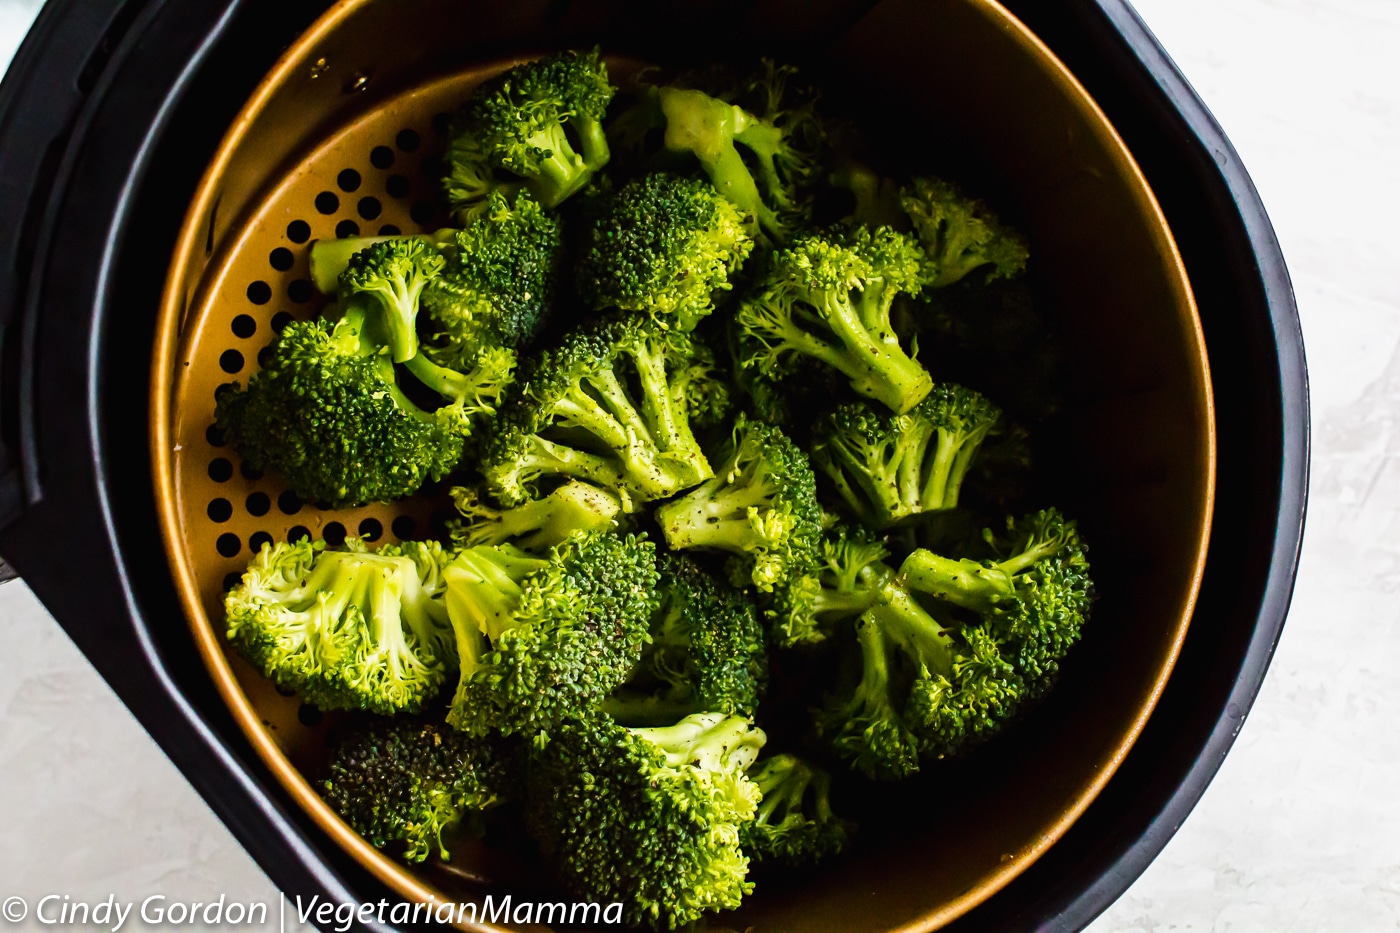 Air Fryer Broccoli - picture of air fryer broccoli in air fryer basket before frying